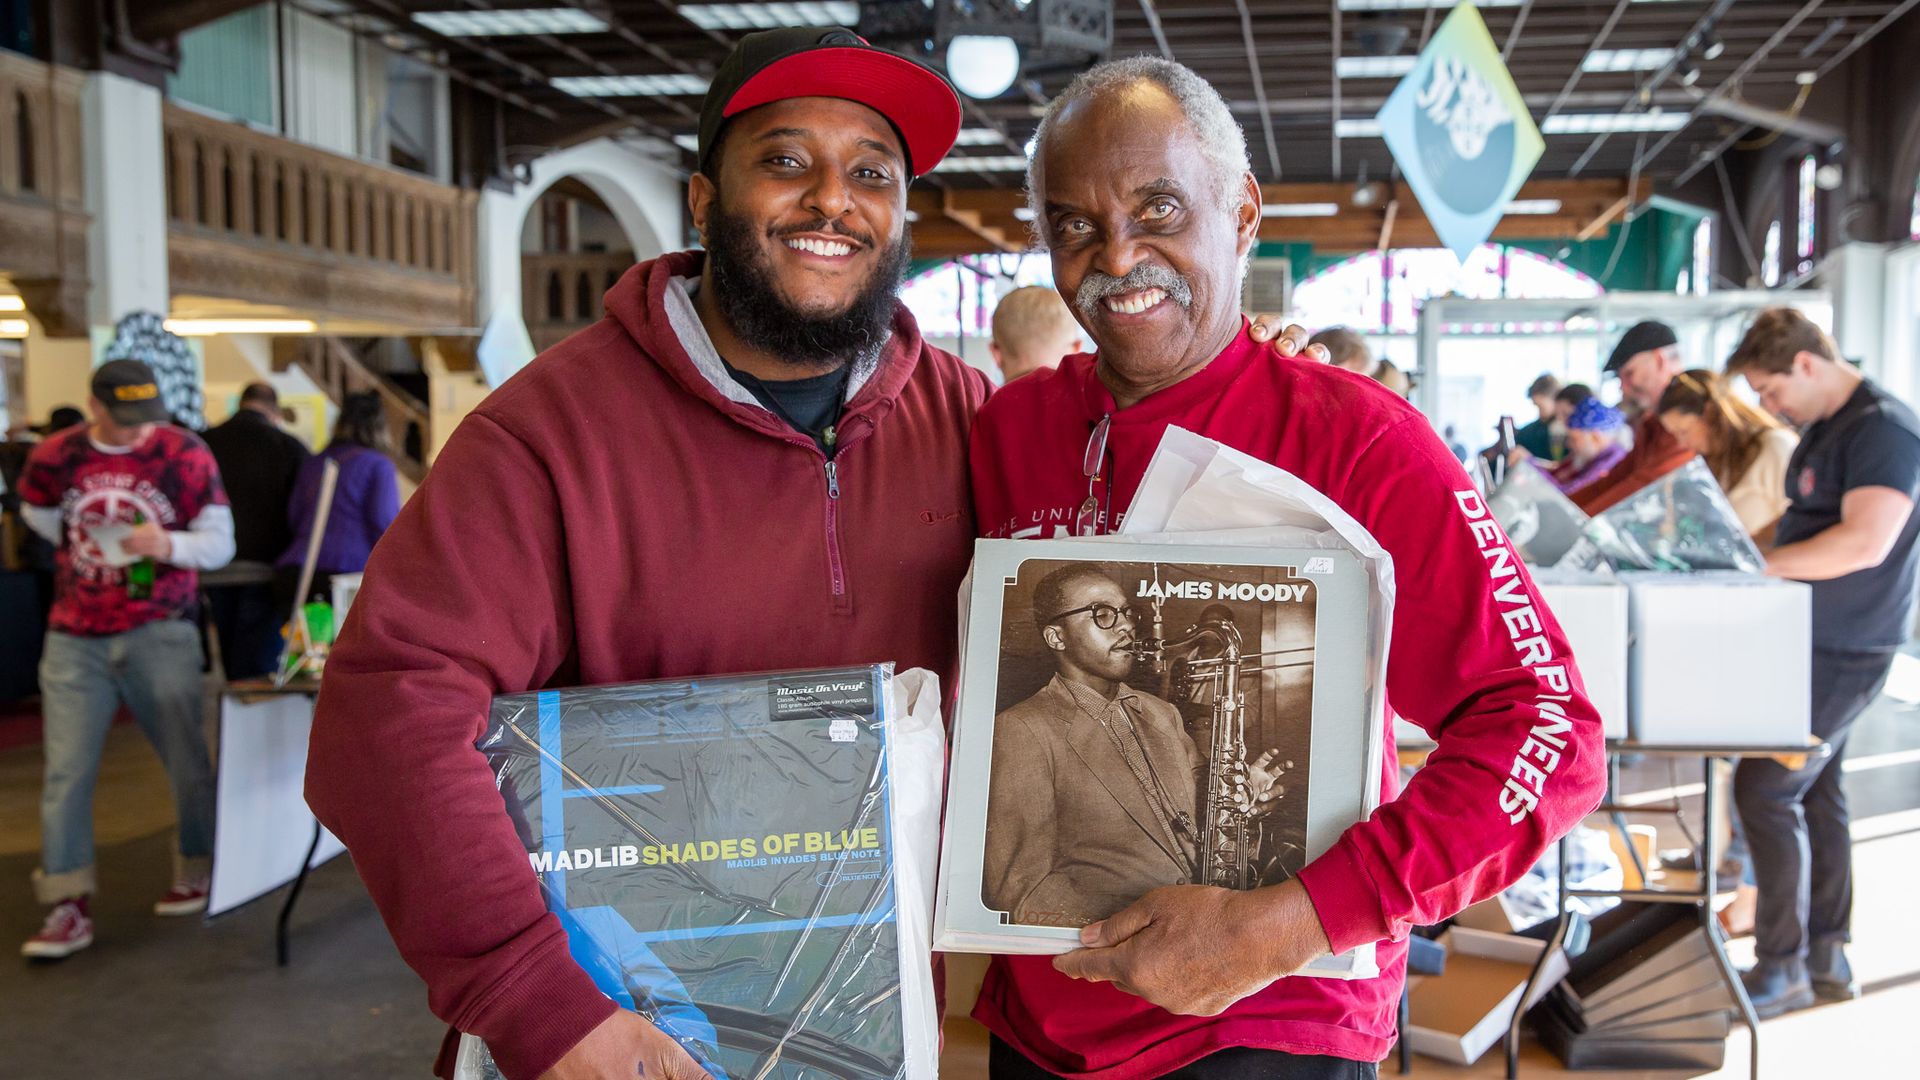 Two men posing for a photo together holding their vinyl records